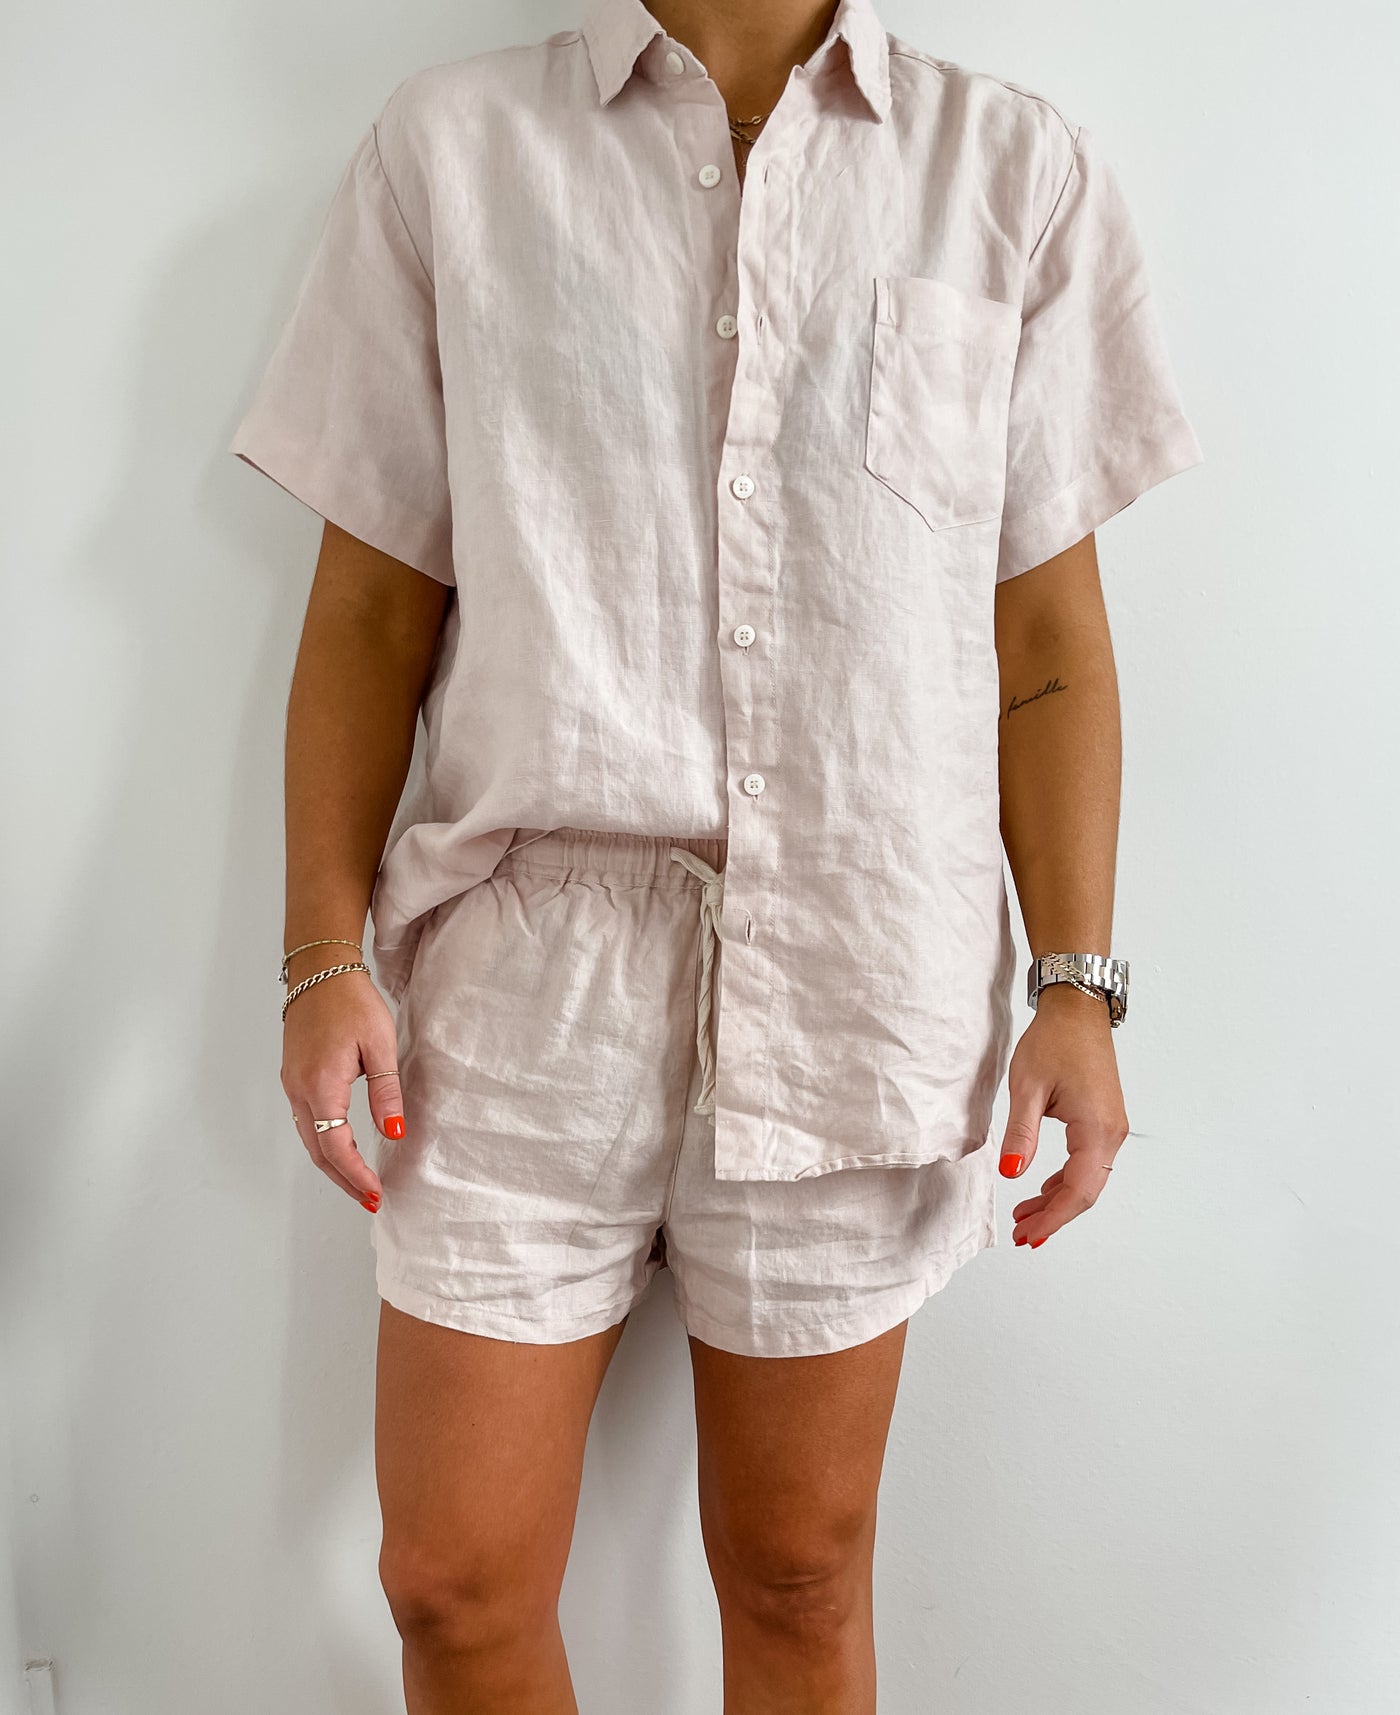 Dusty Pink French Linen Shorts - Home On Darley Sydney French Linen Loungewear